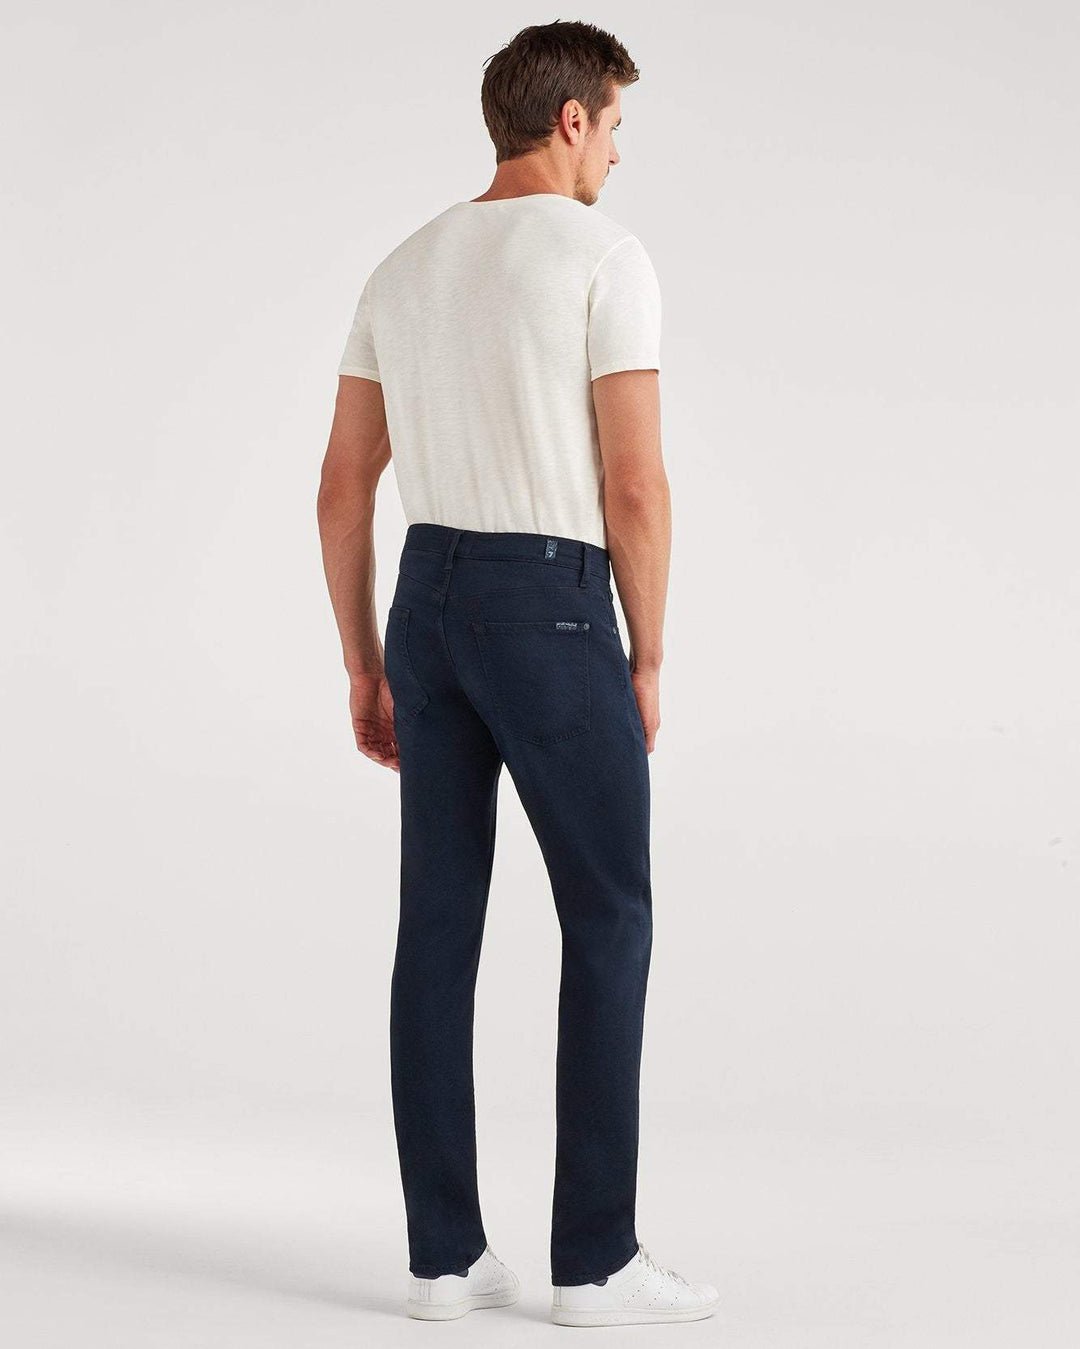 7 For All Mankind Luxe Sport Slimmy Pantalon